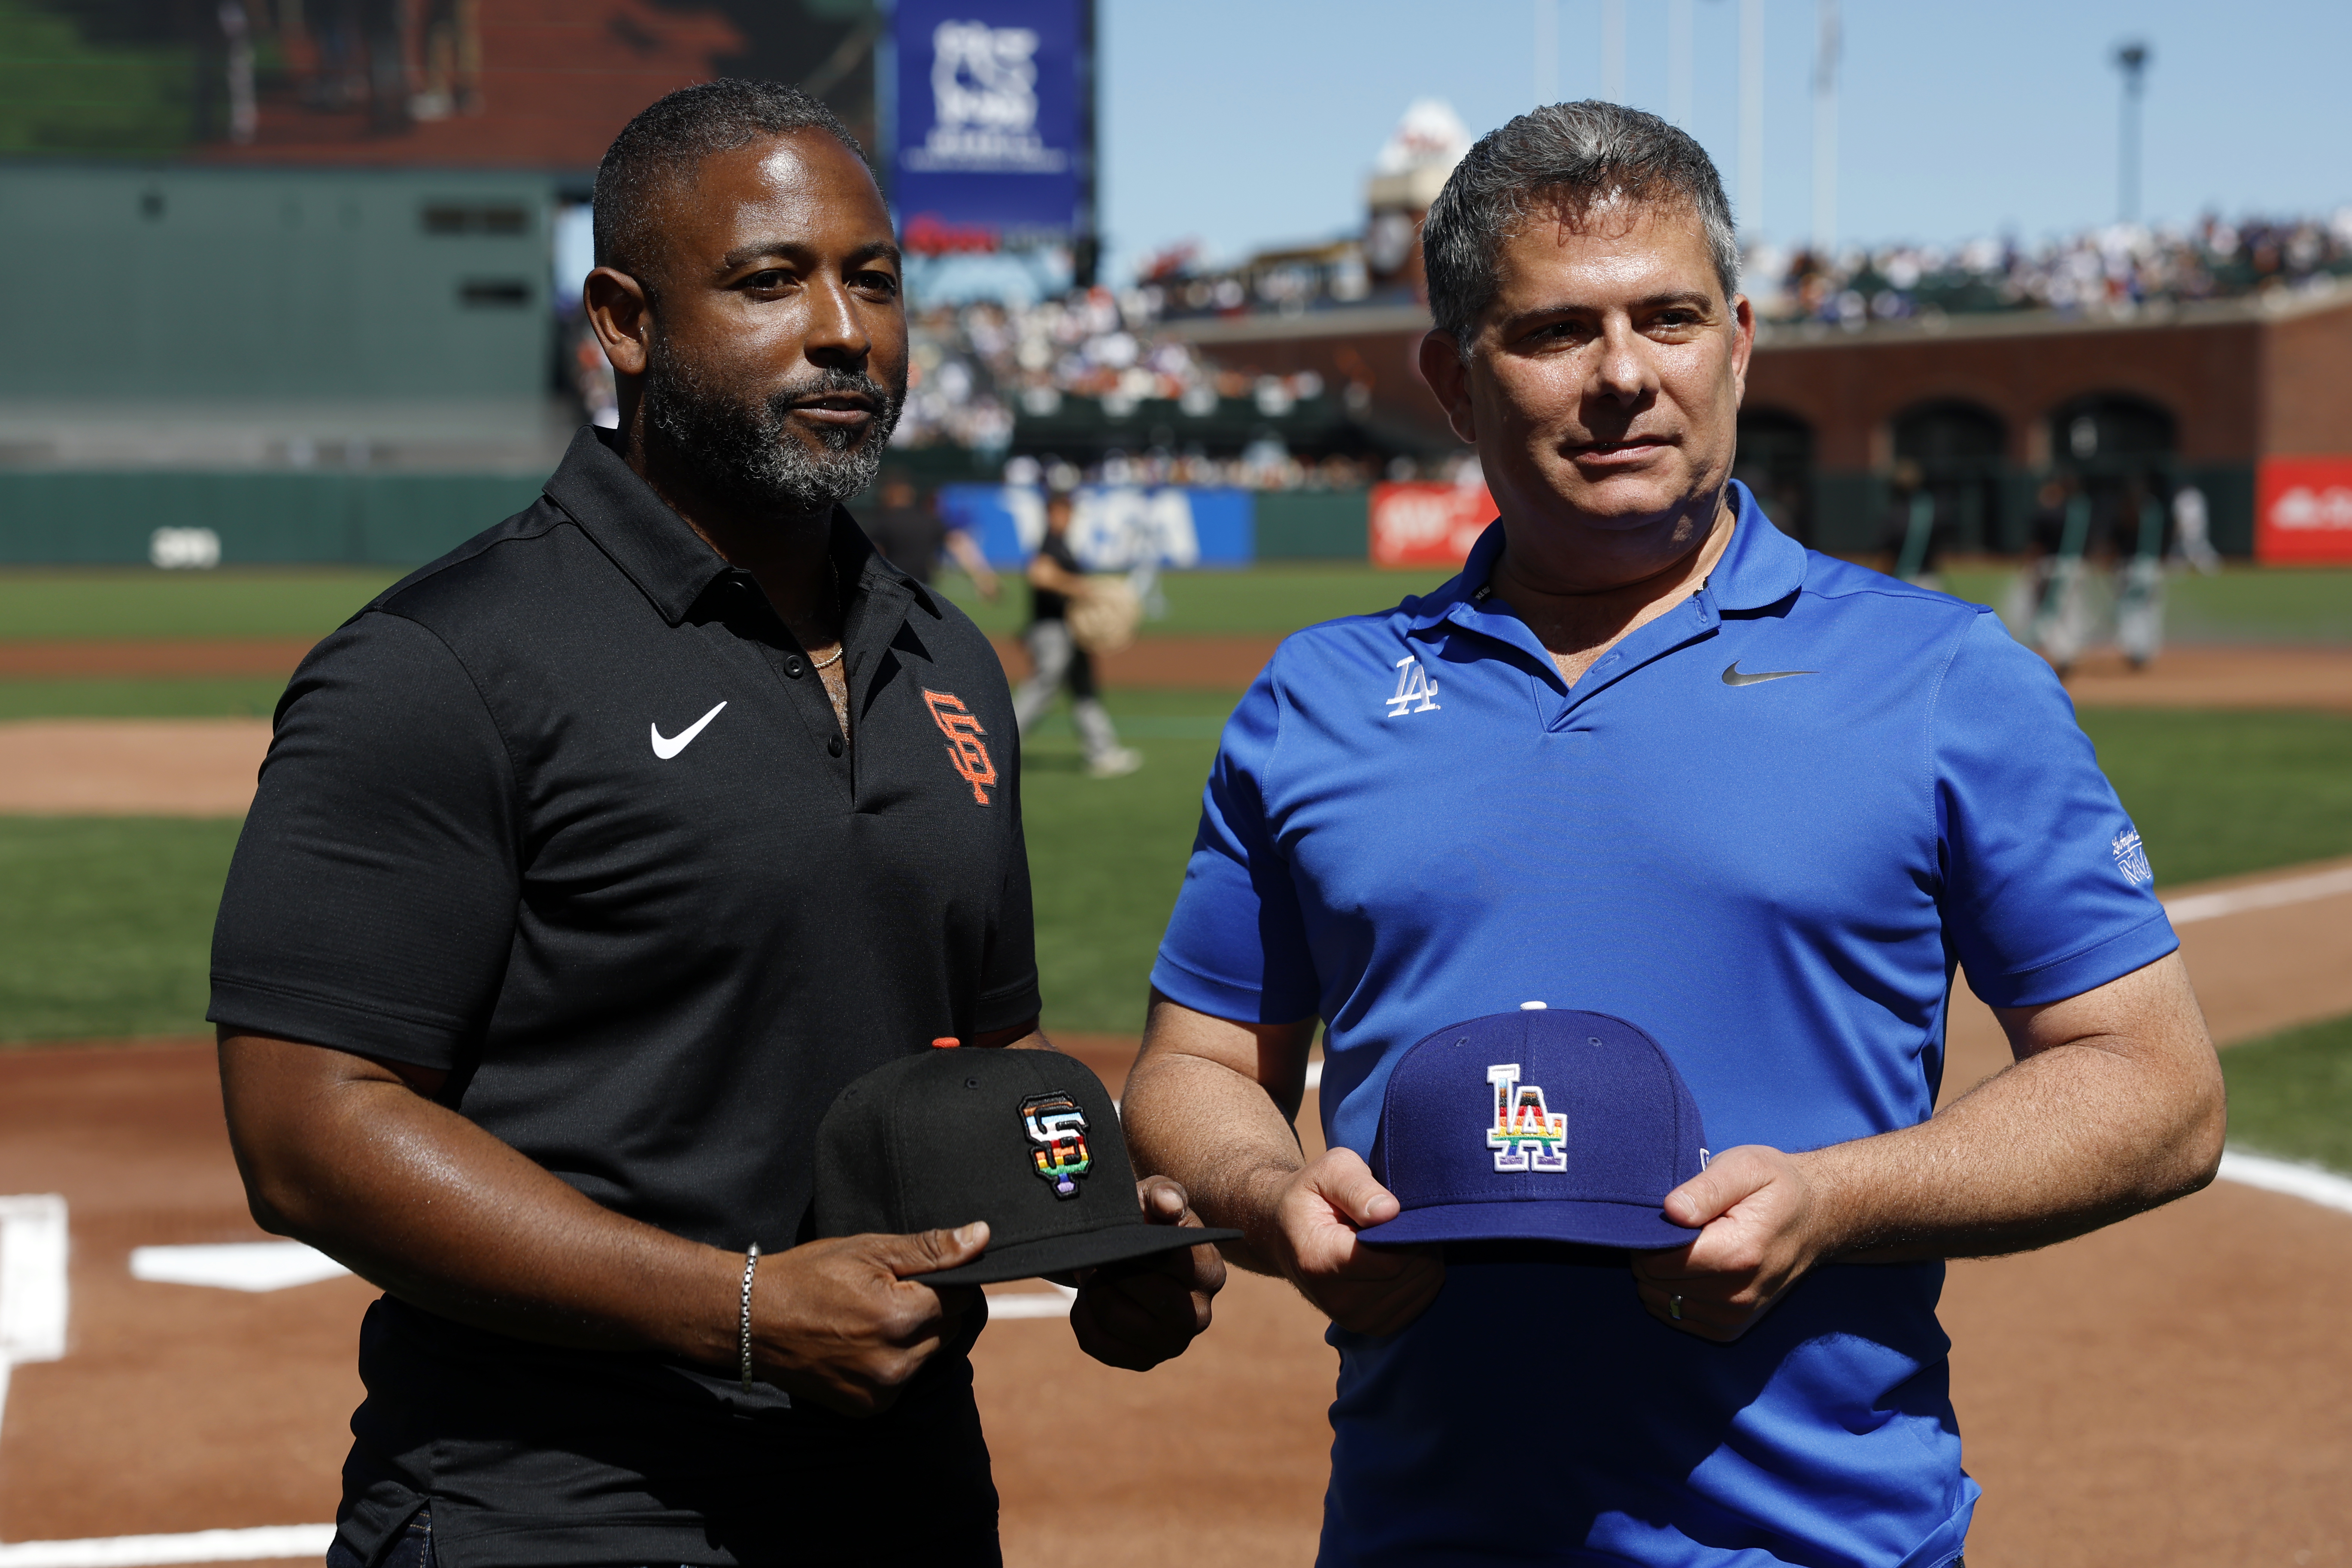 Roscoe Mapps, left, of the GIants, with Erik Braverman of the Dodgers at the Giants’ Pride Night in 2022.